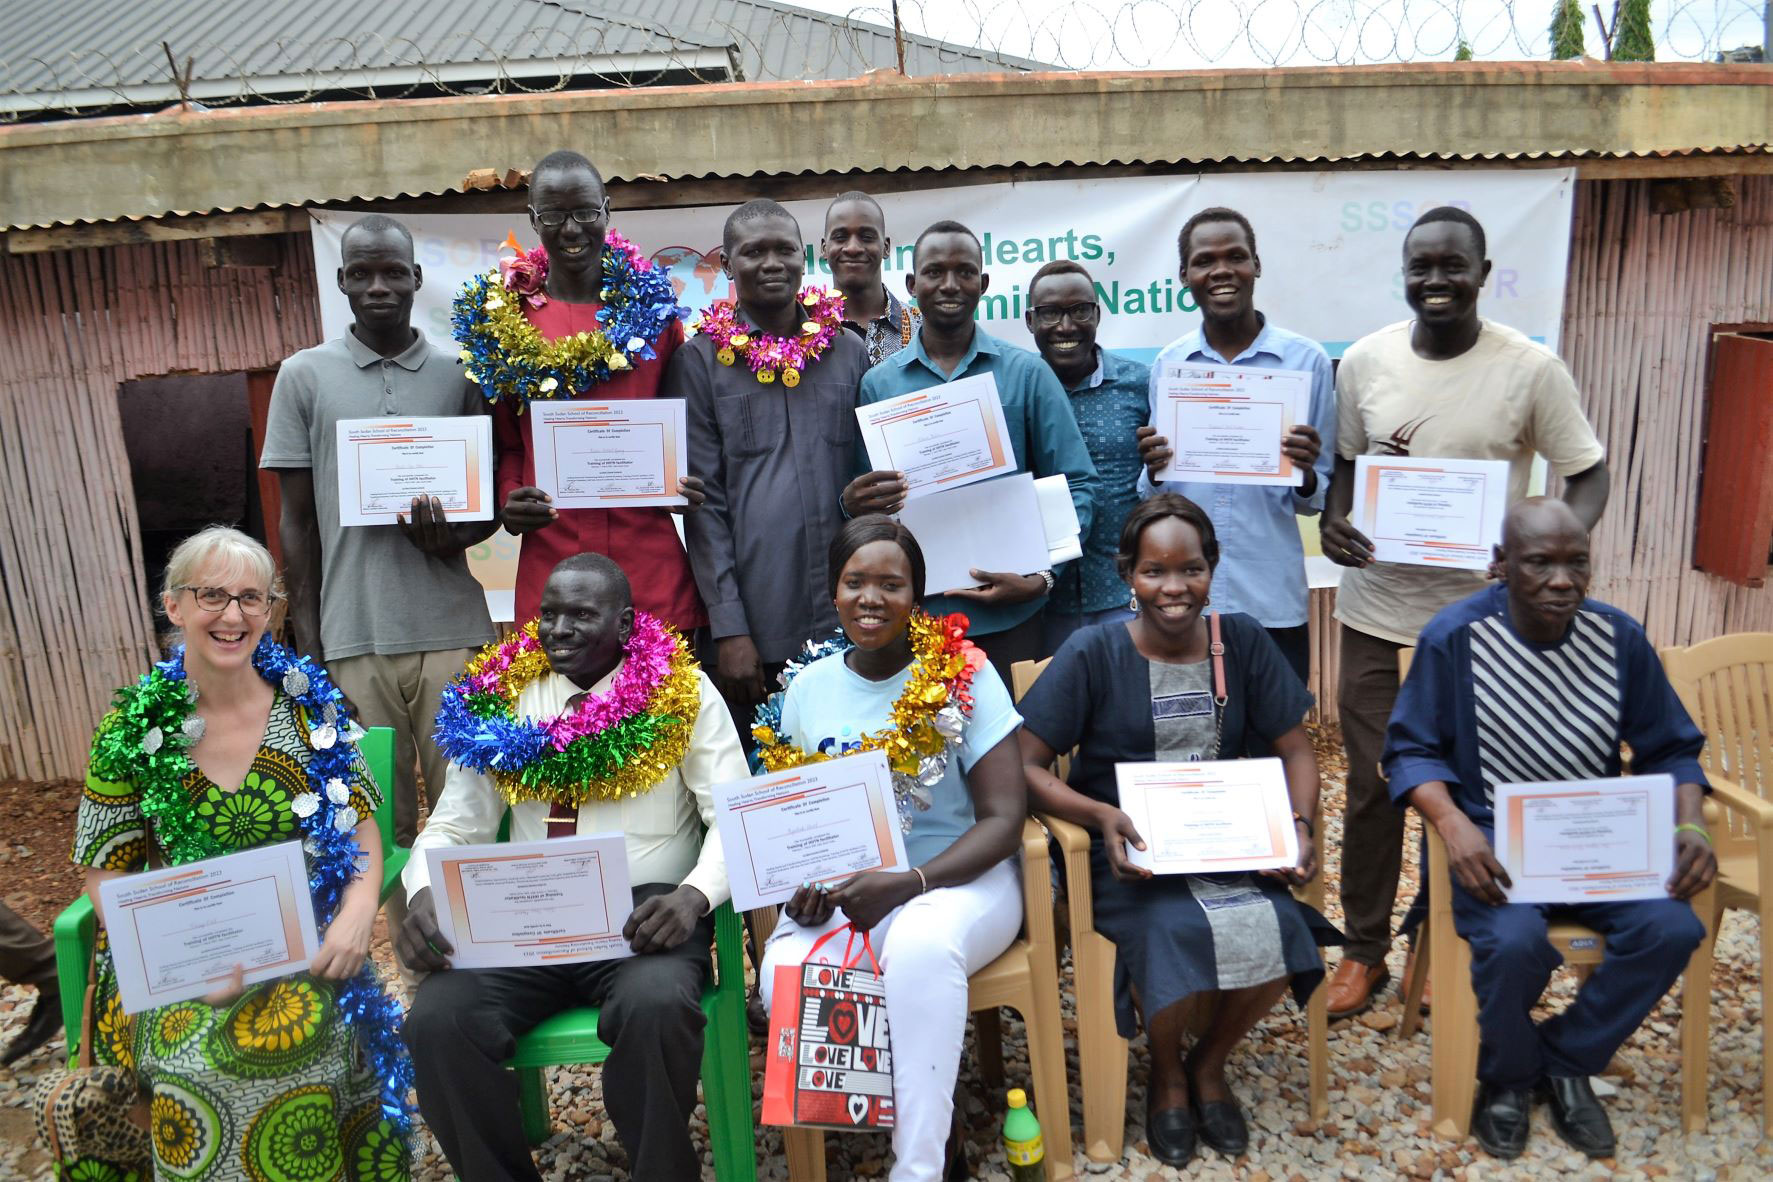 The new facilitators for the healing and reconciliation workshop at the graduation of the training